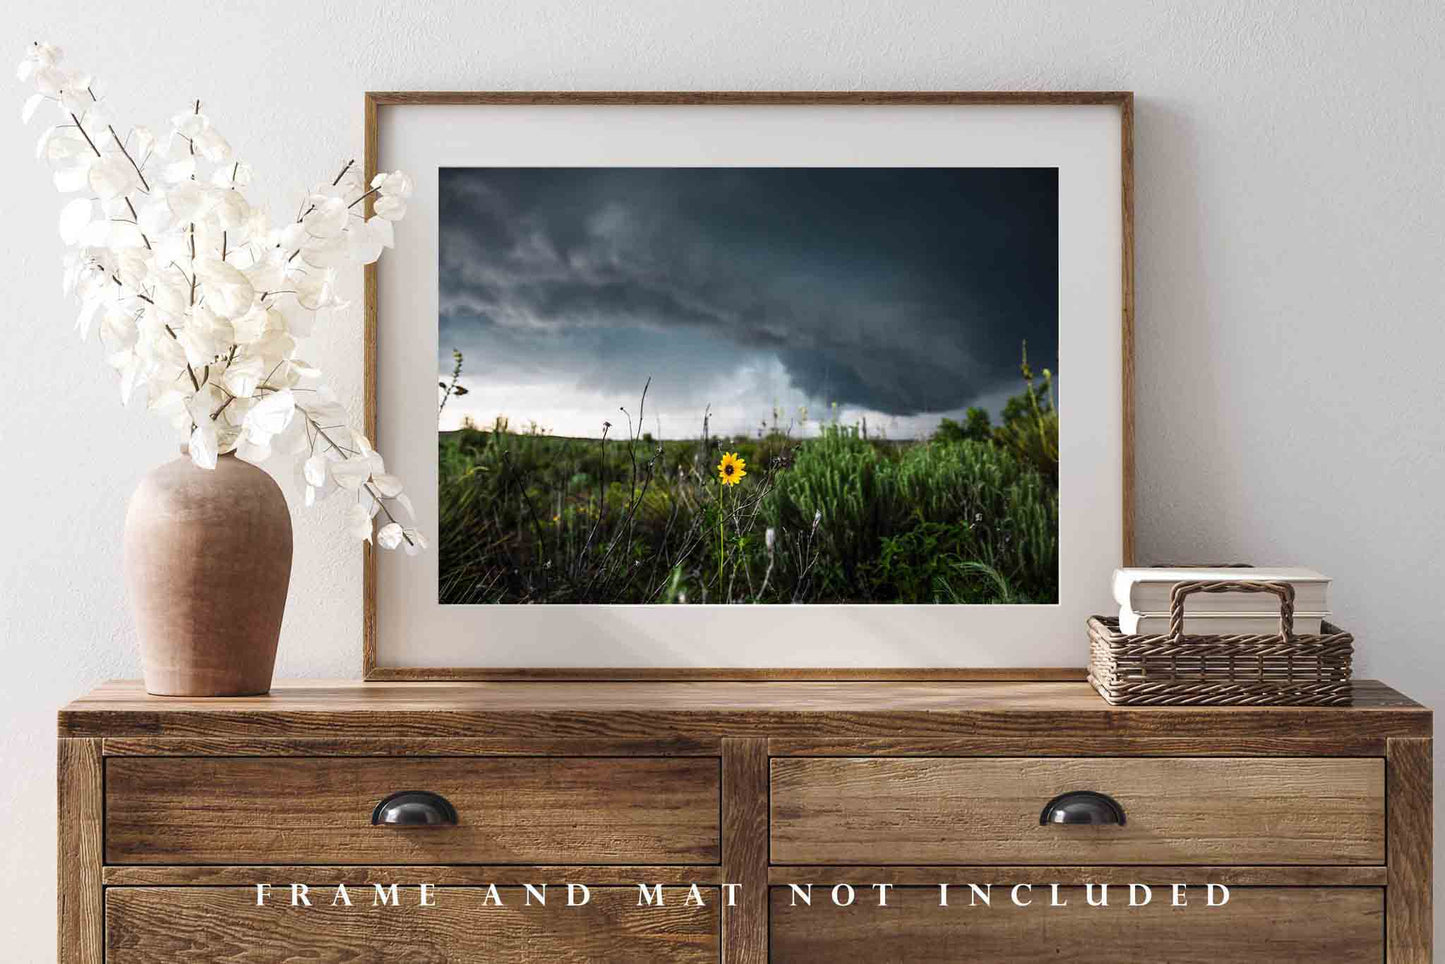 Storm Wall Art - Picture of Wild Sunflower and Passing Thunderstorm in Texas - Country Nature Photography Photo Print Artwork Decor